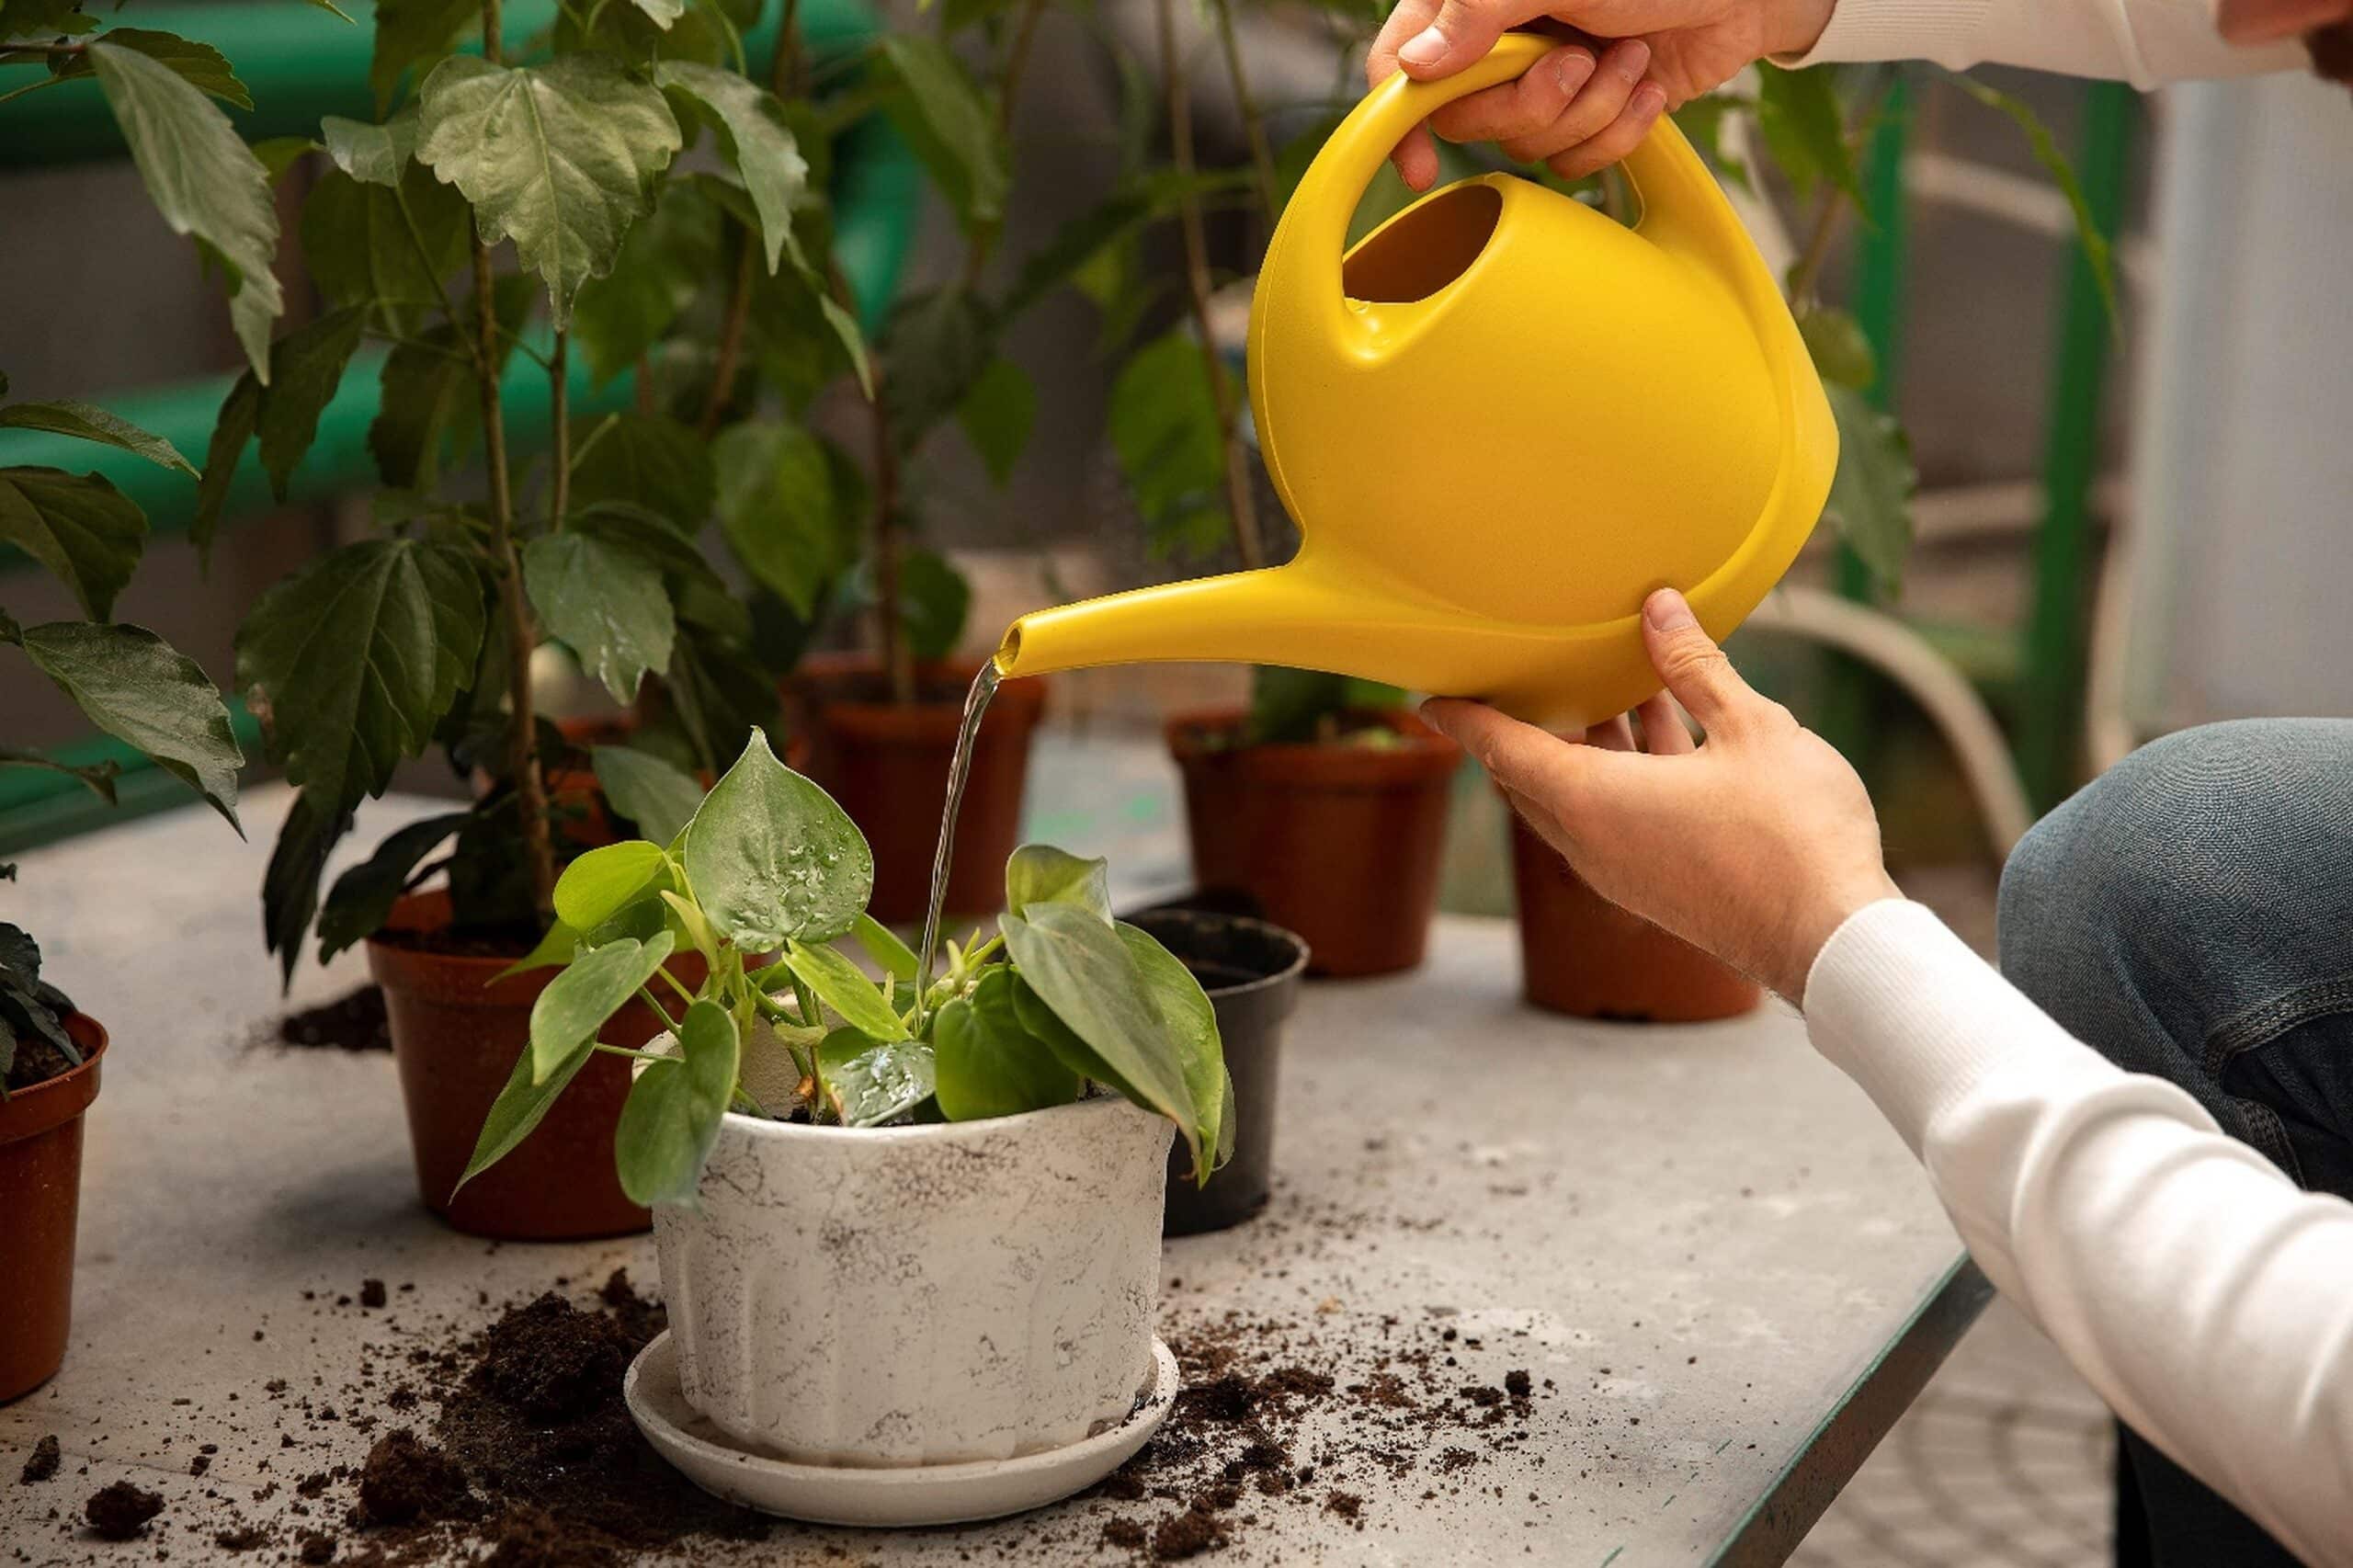 Watering Potted Plants and Flowers